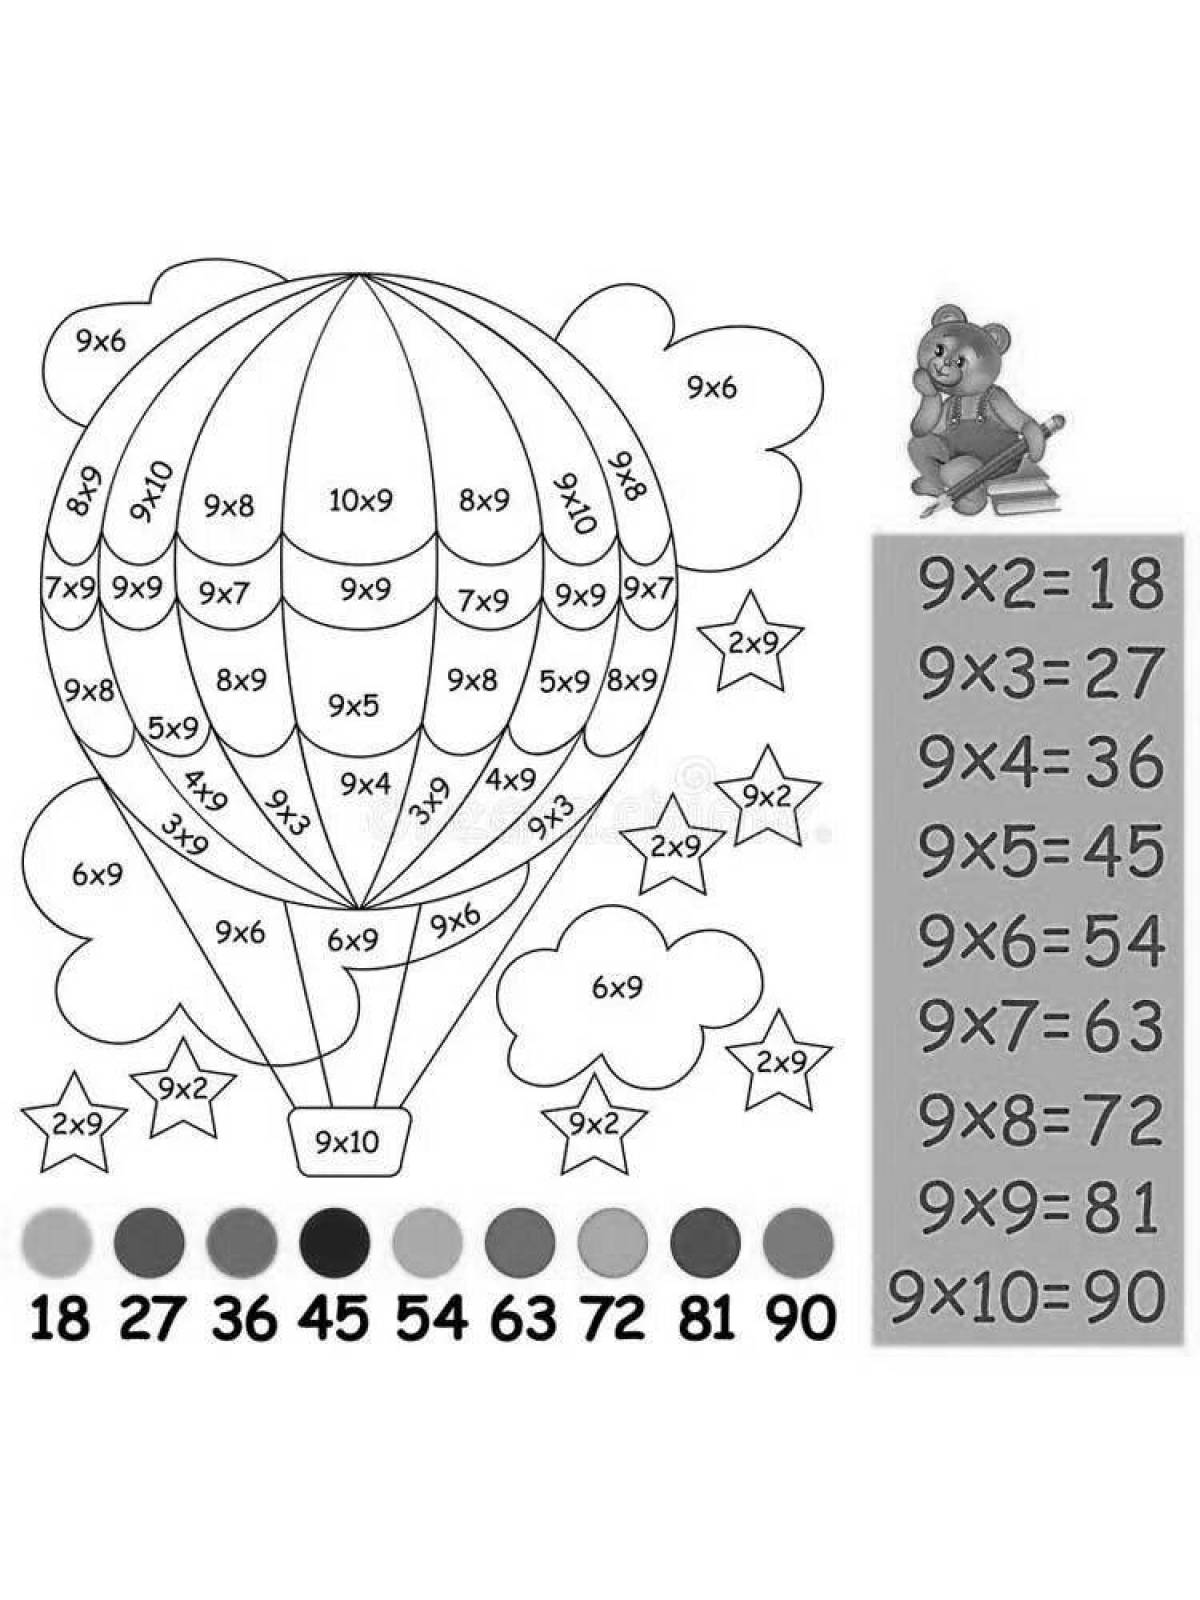 Colorfully illustrated multiplication table 2 by 3